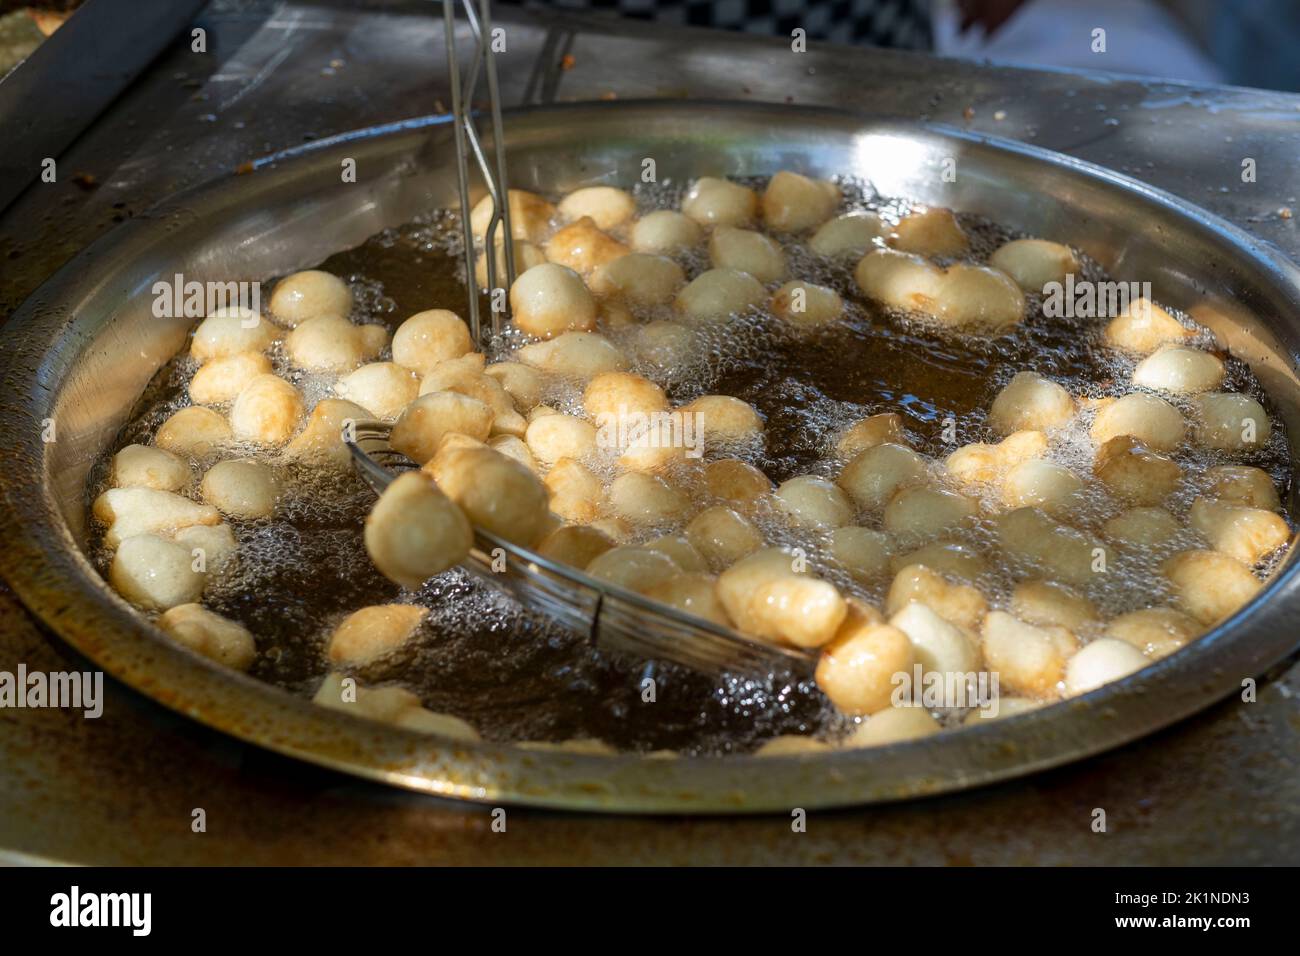 Loukoumades (Cypriot doughnuts) being made at the Statos-Agios Fotios Rural Festival, Paphos region, Cyprus Stock Photo